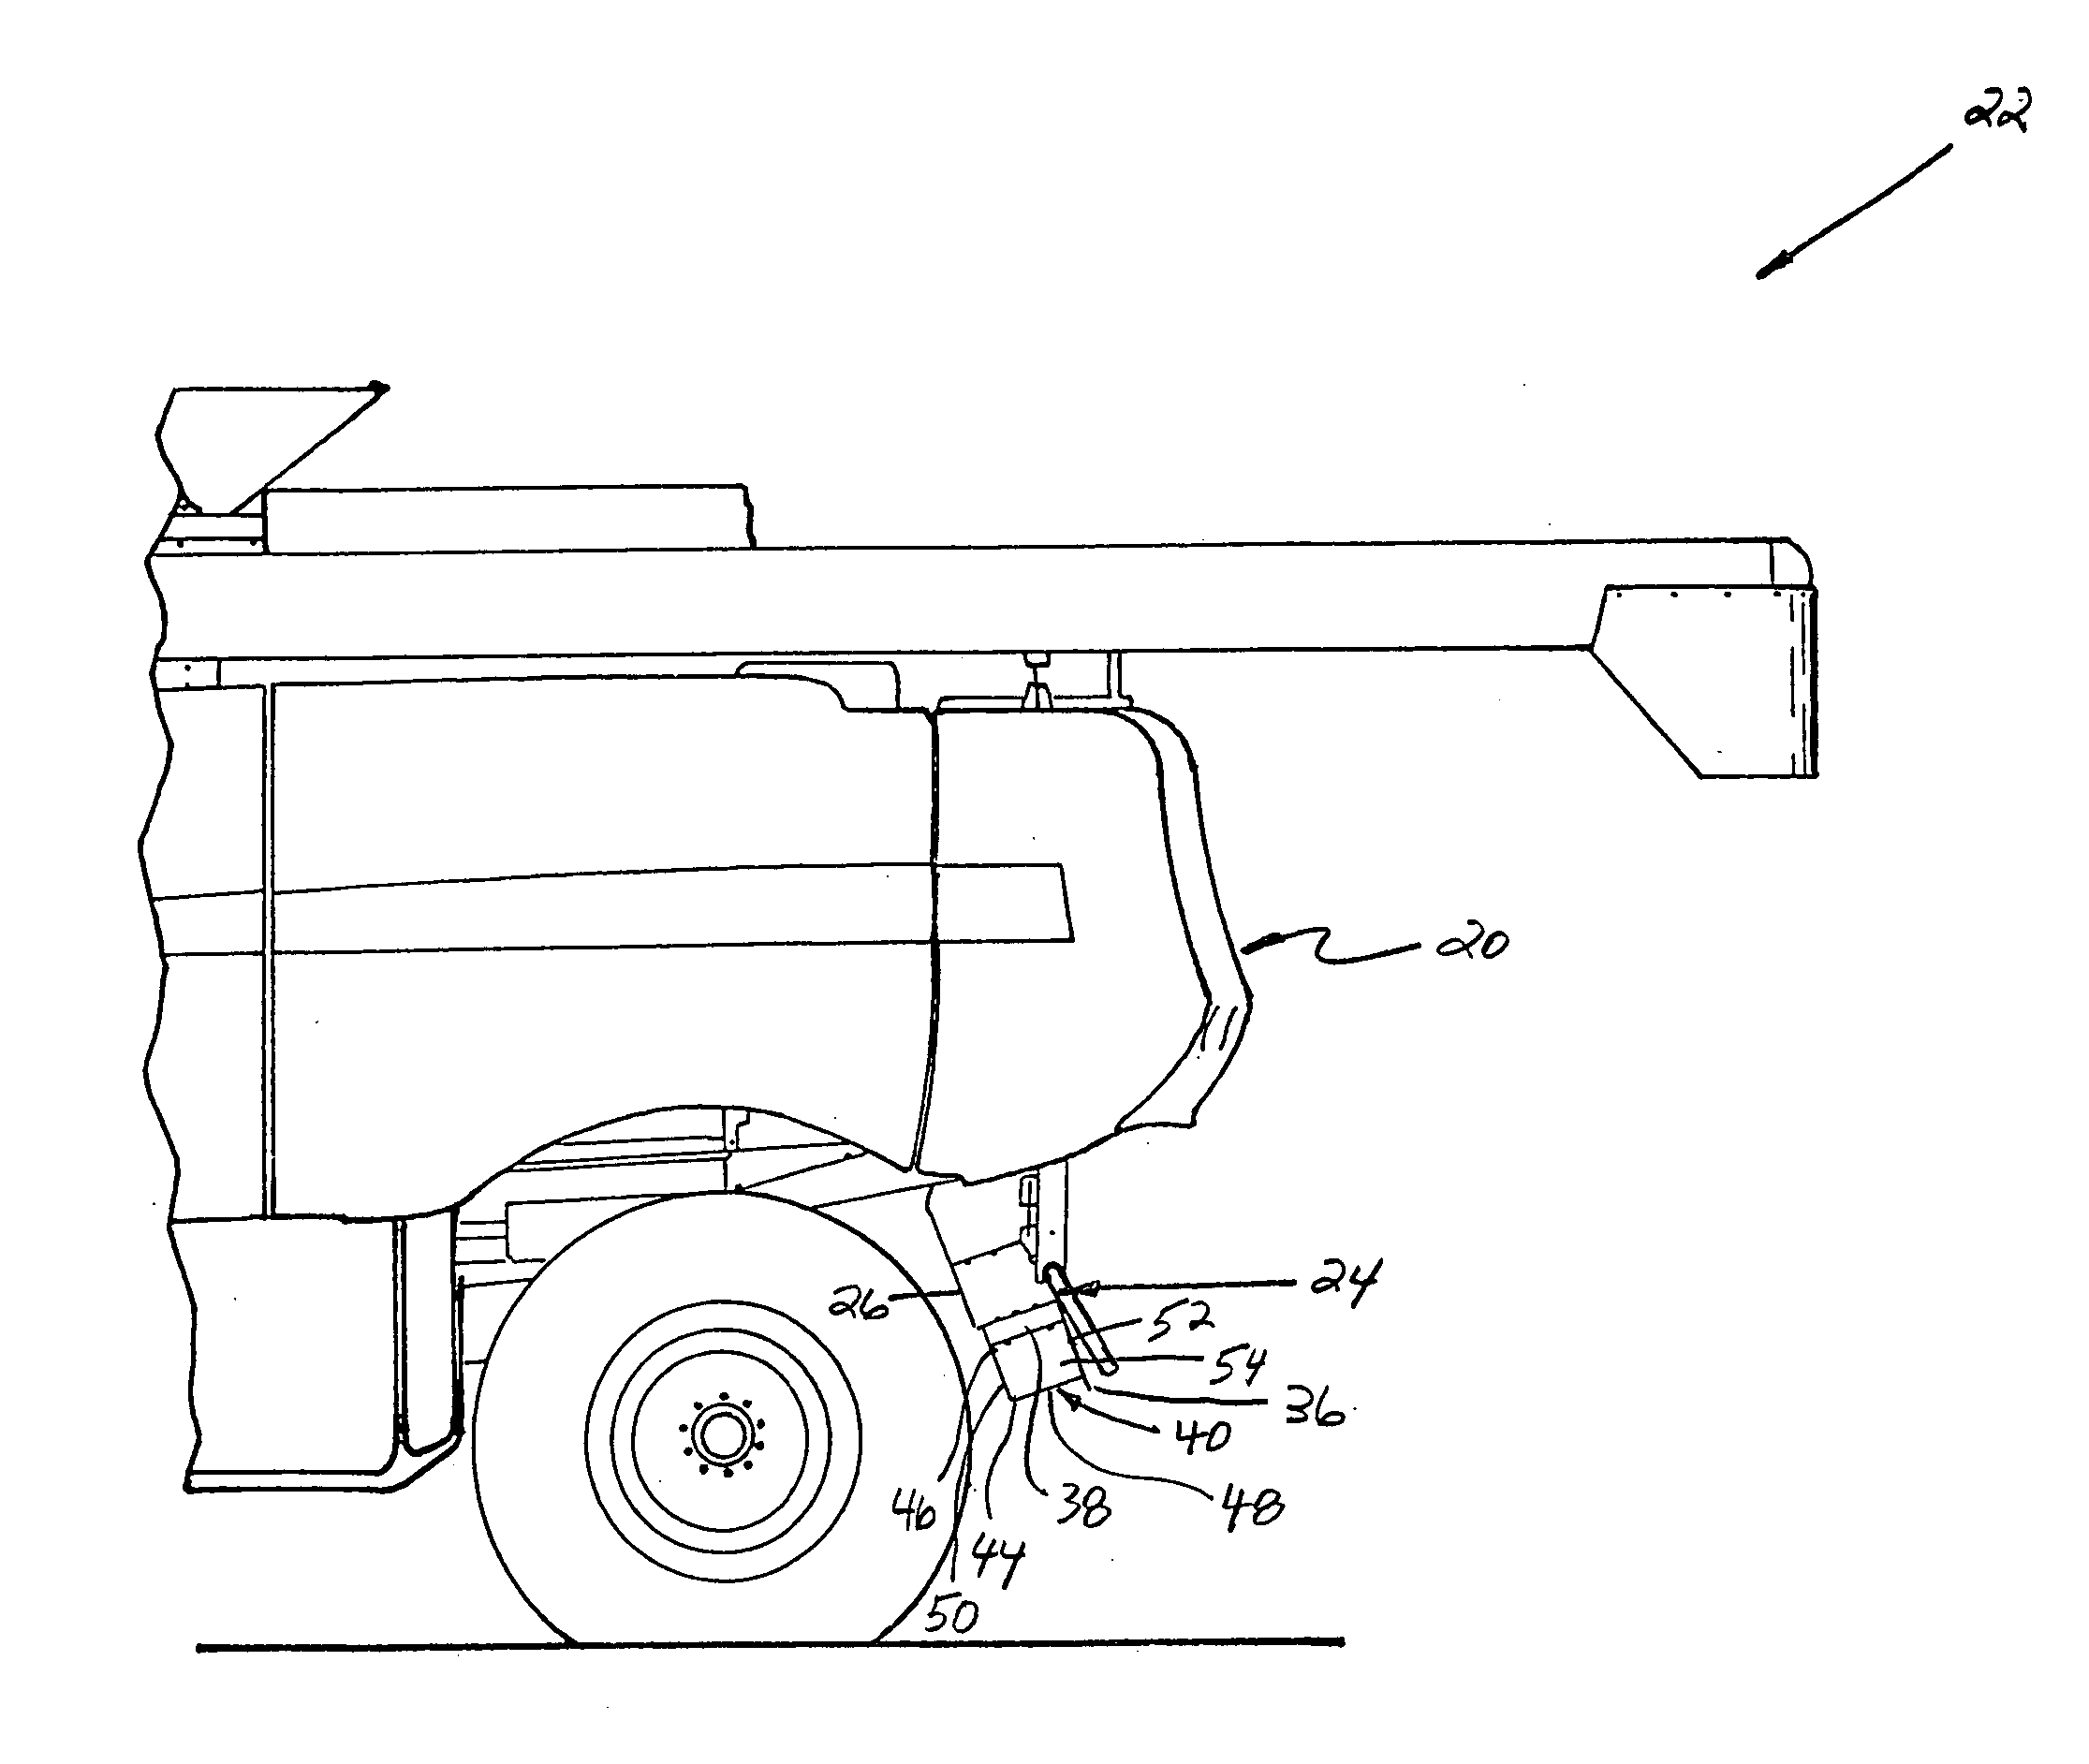 Adjustable crop residue flow distributor for a vertical spreader of an agricultural combine